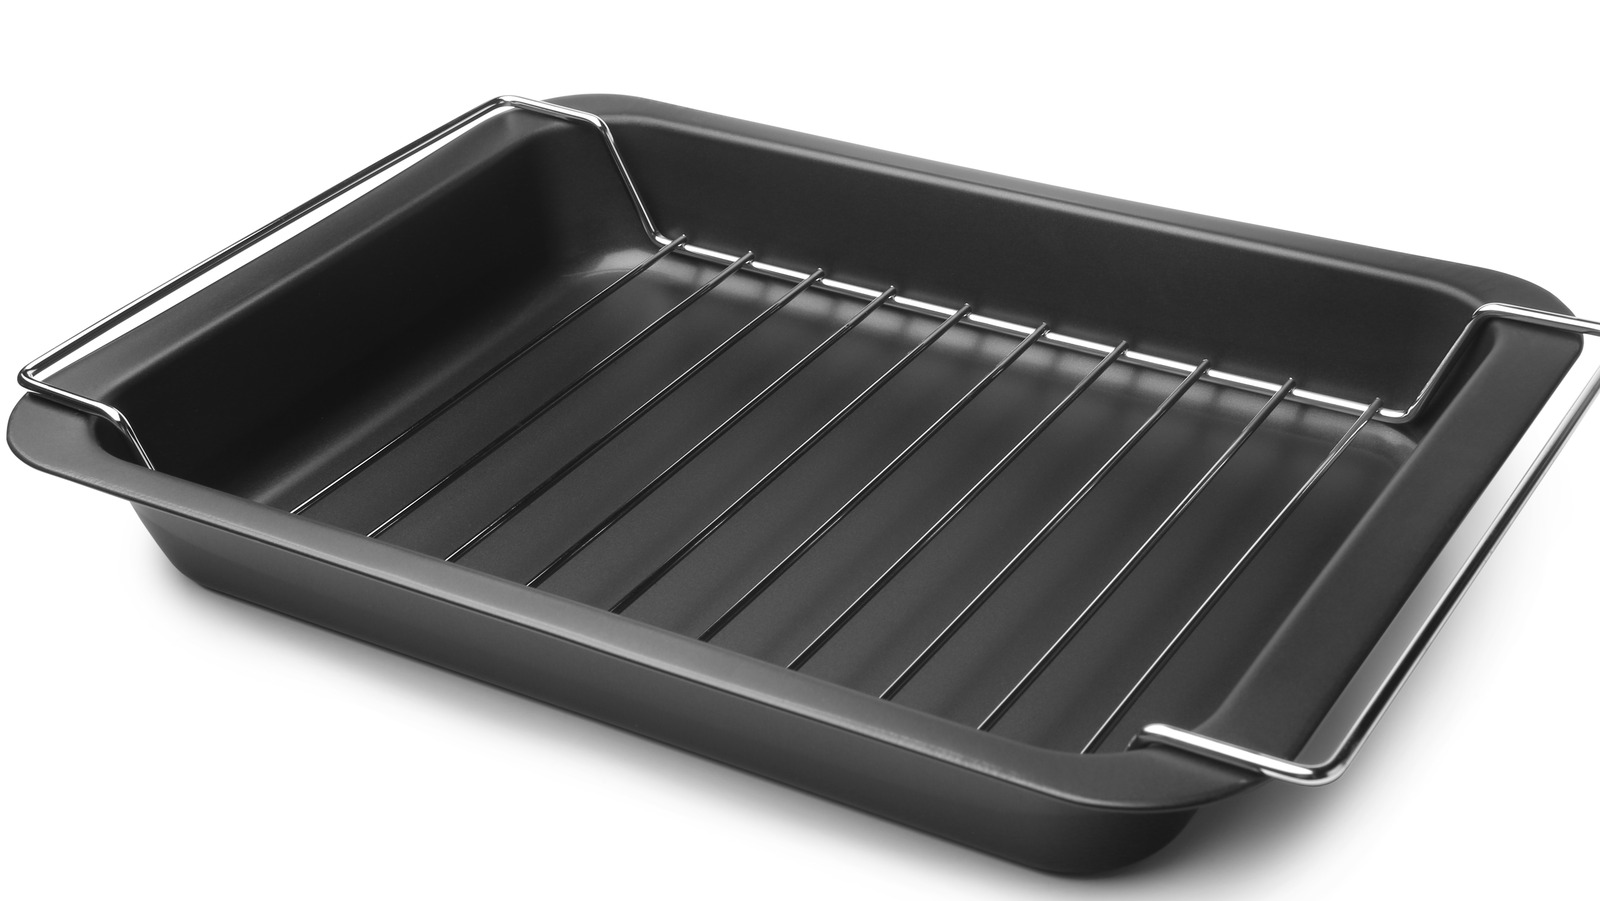 The Best Roasting Pan for Your Holiday Dinner